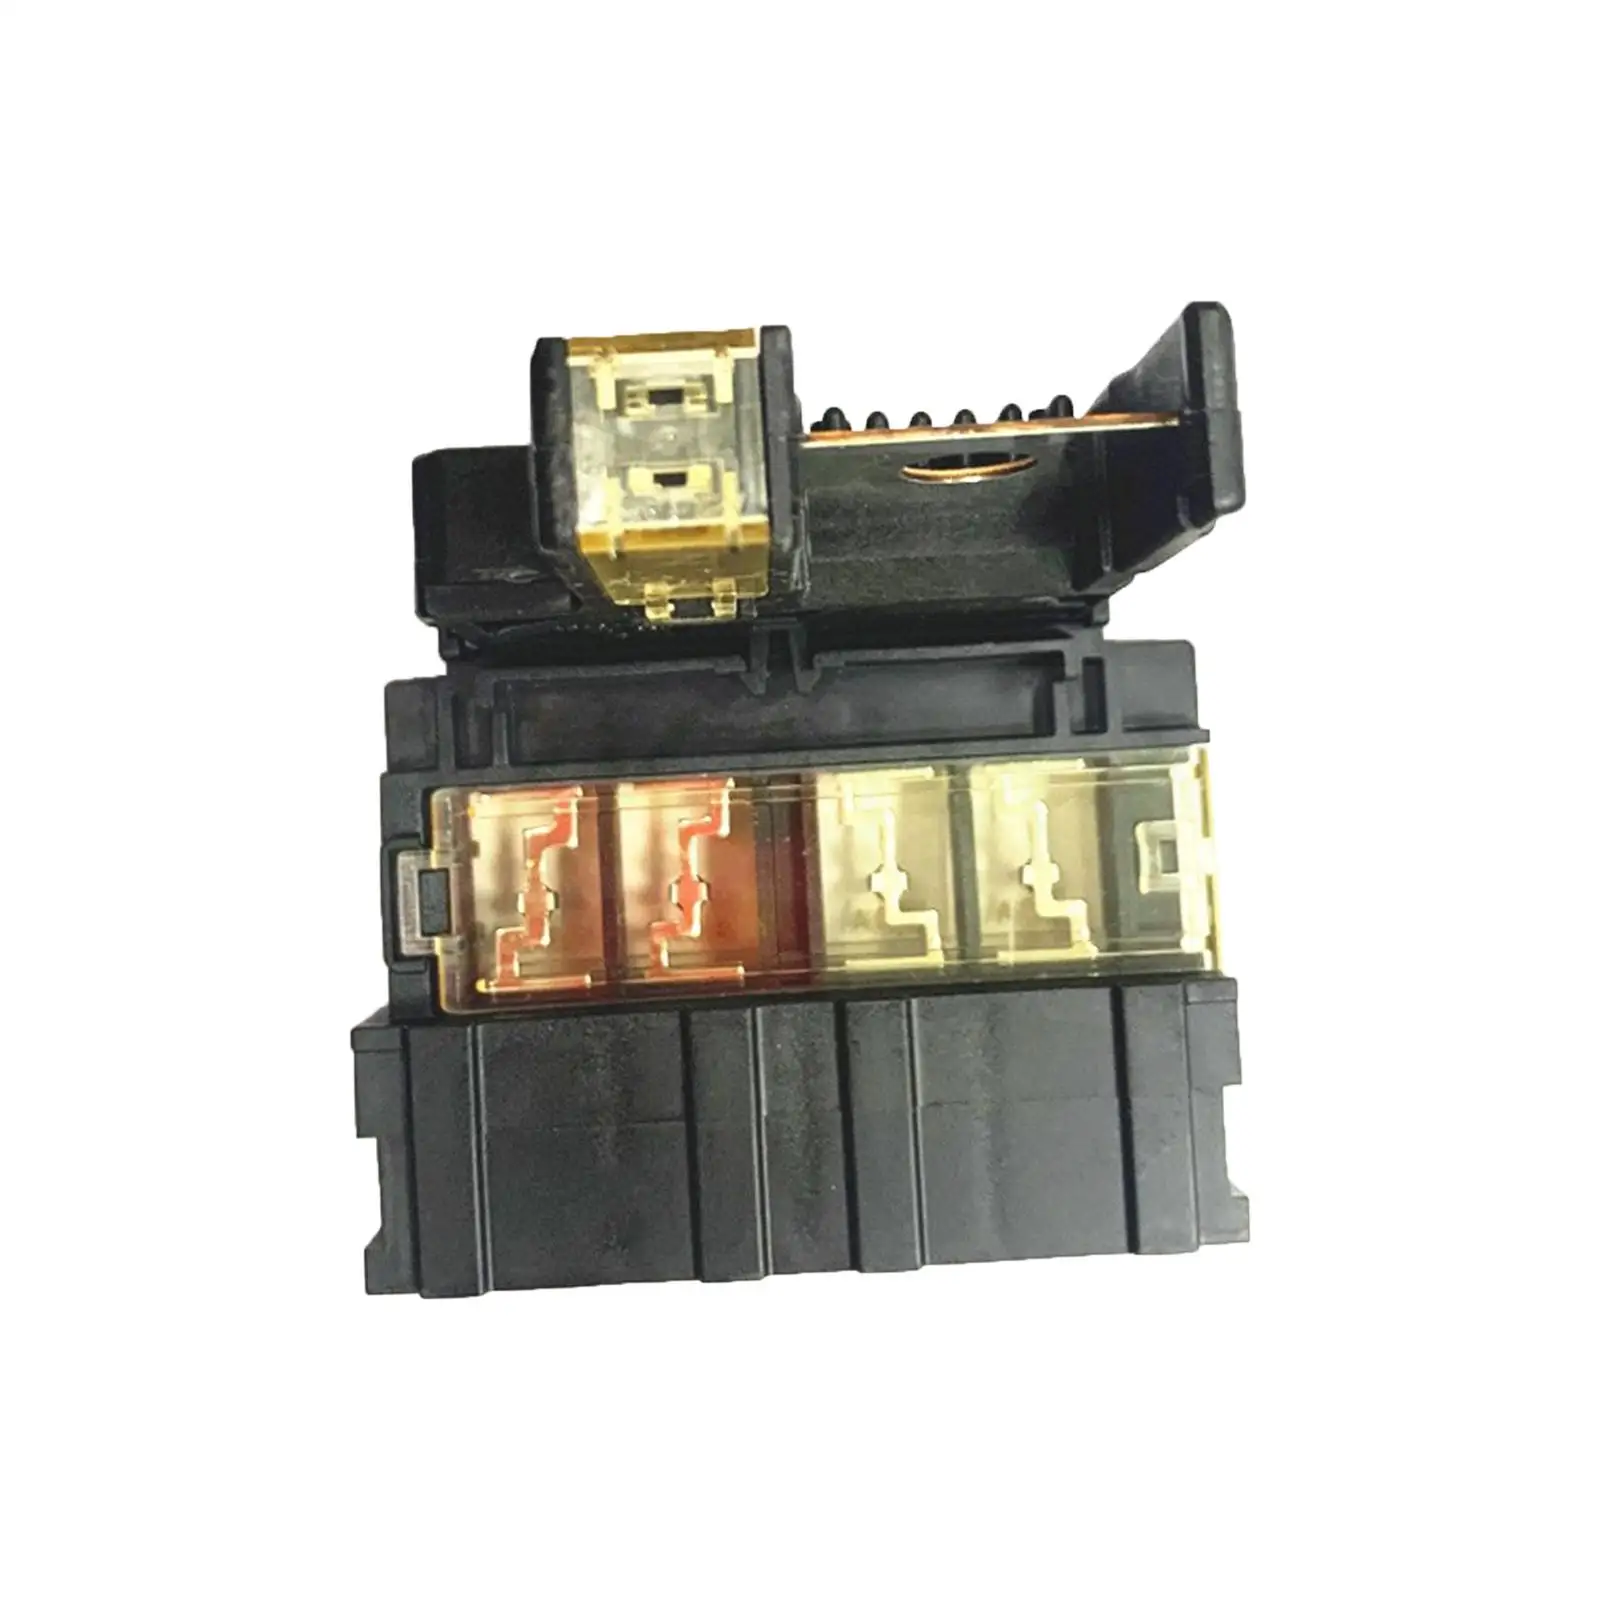 24380-79912/ Positive Battery Fuse Connector for Suzuki Swift 2005-2010